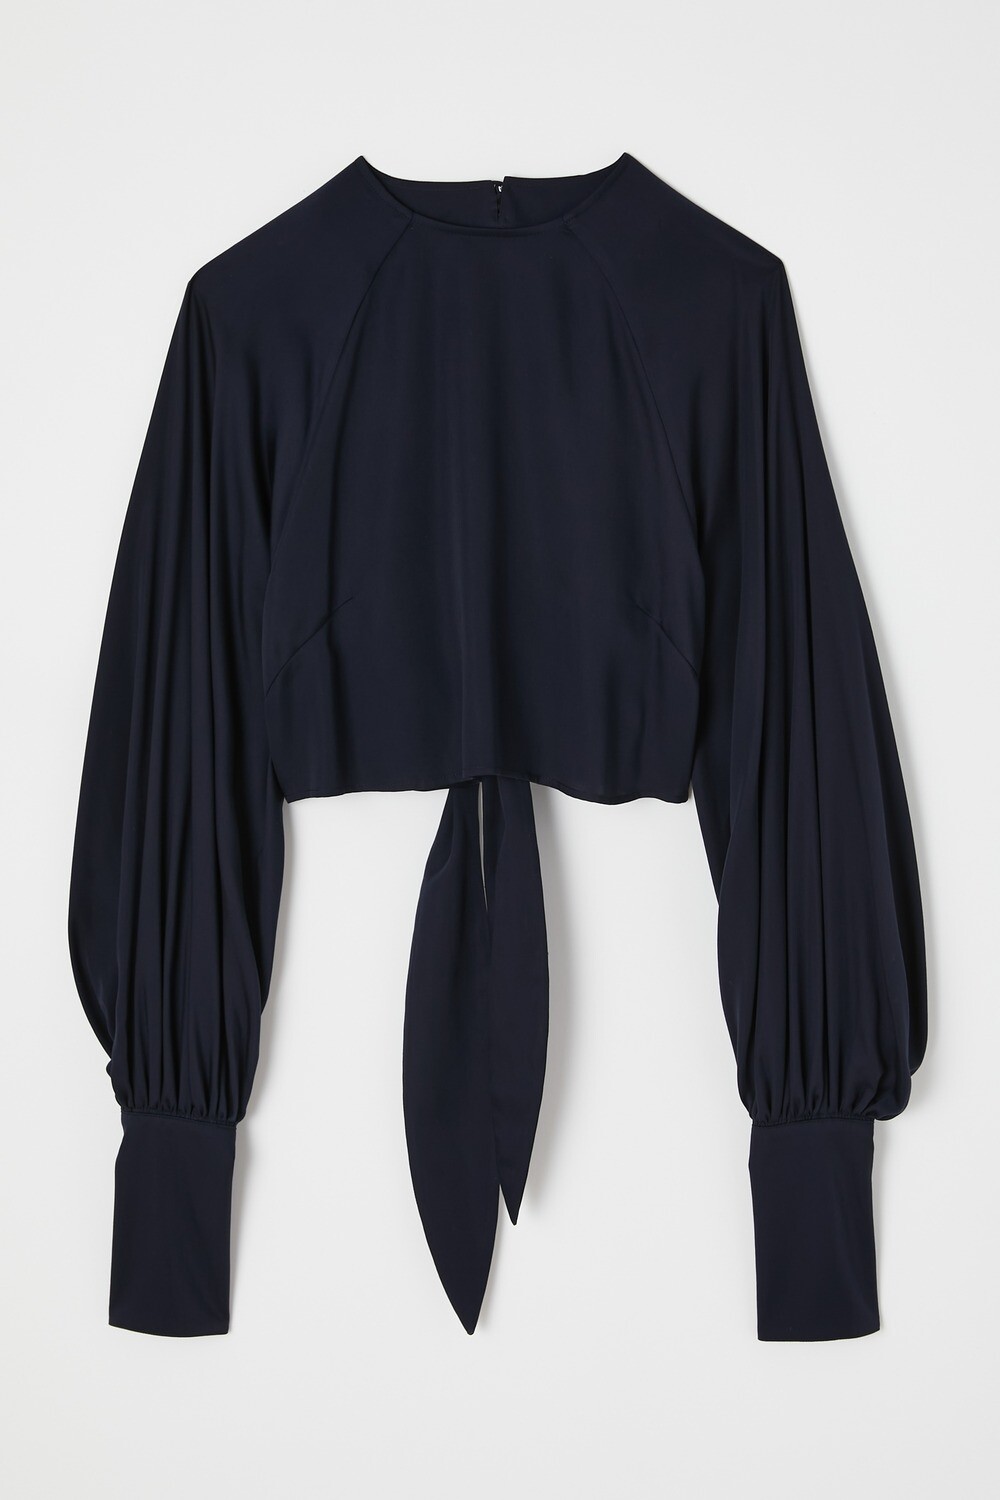 Moussy Vintage Back Open Balloon Sleeve Shirt in Navy